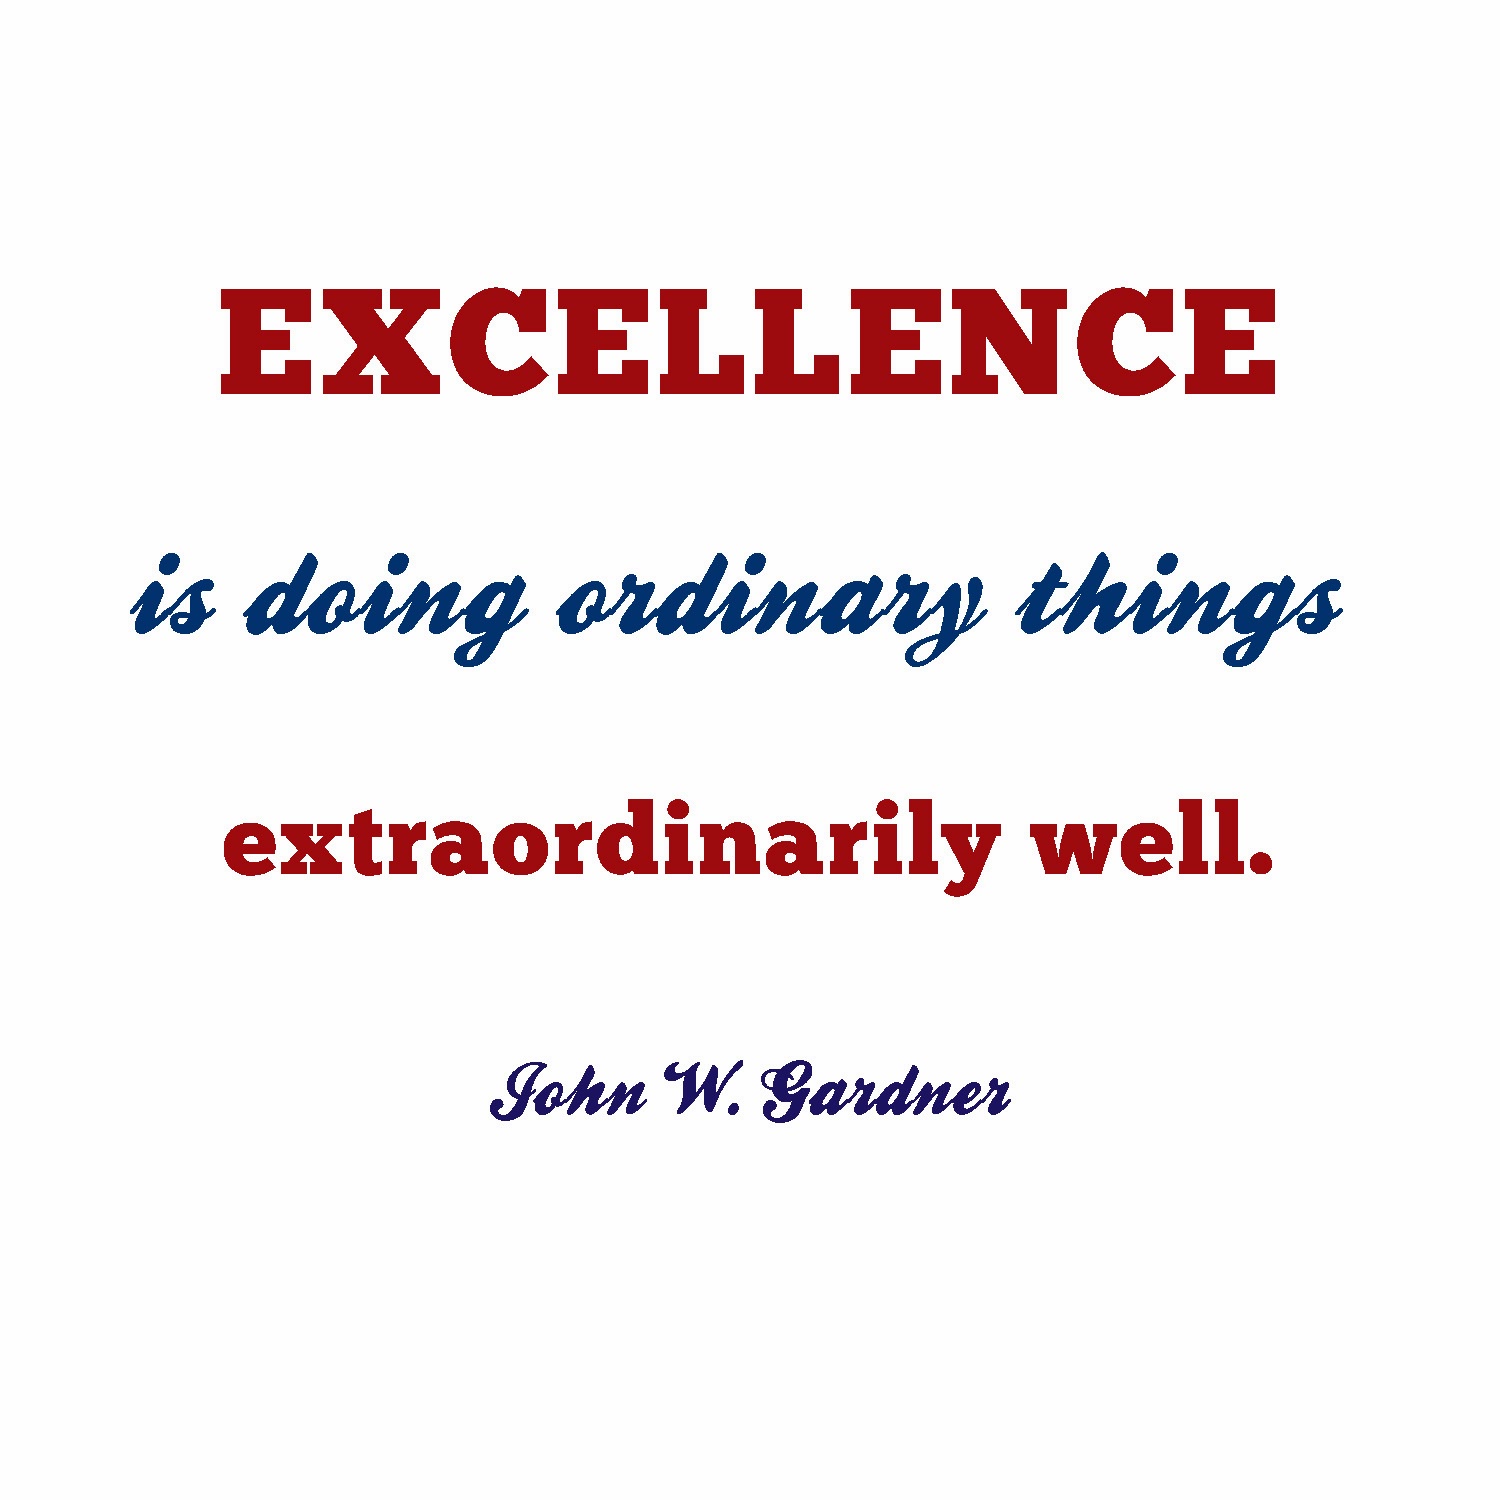 Excellence Quotes And Sayings. QuotesGram